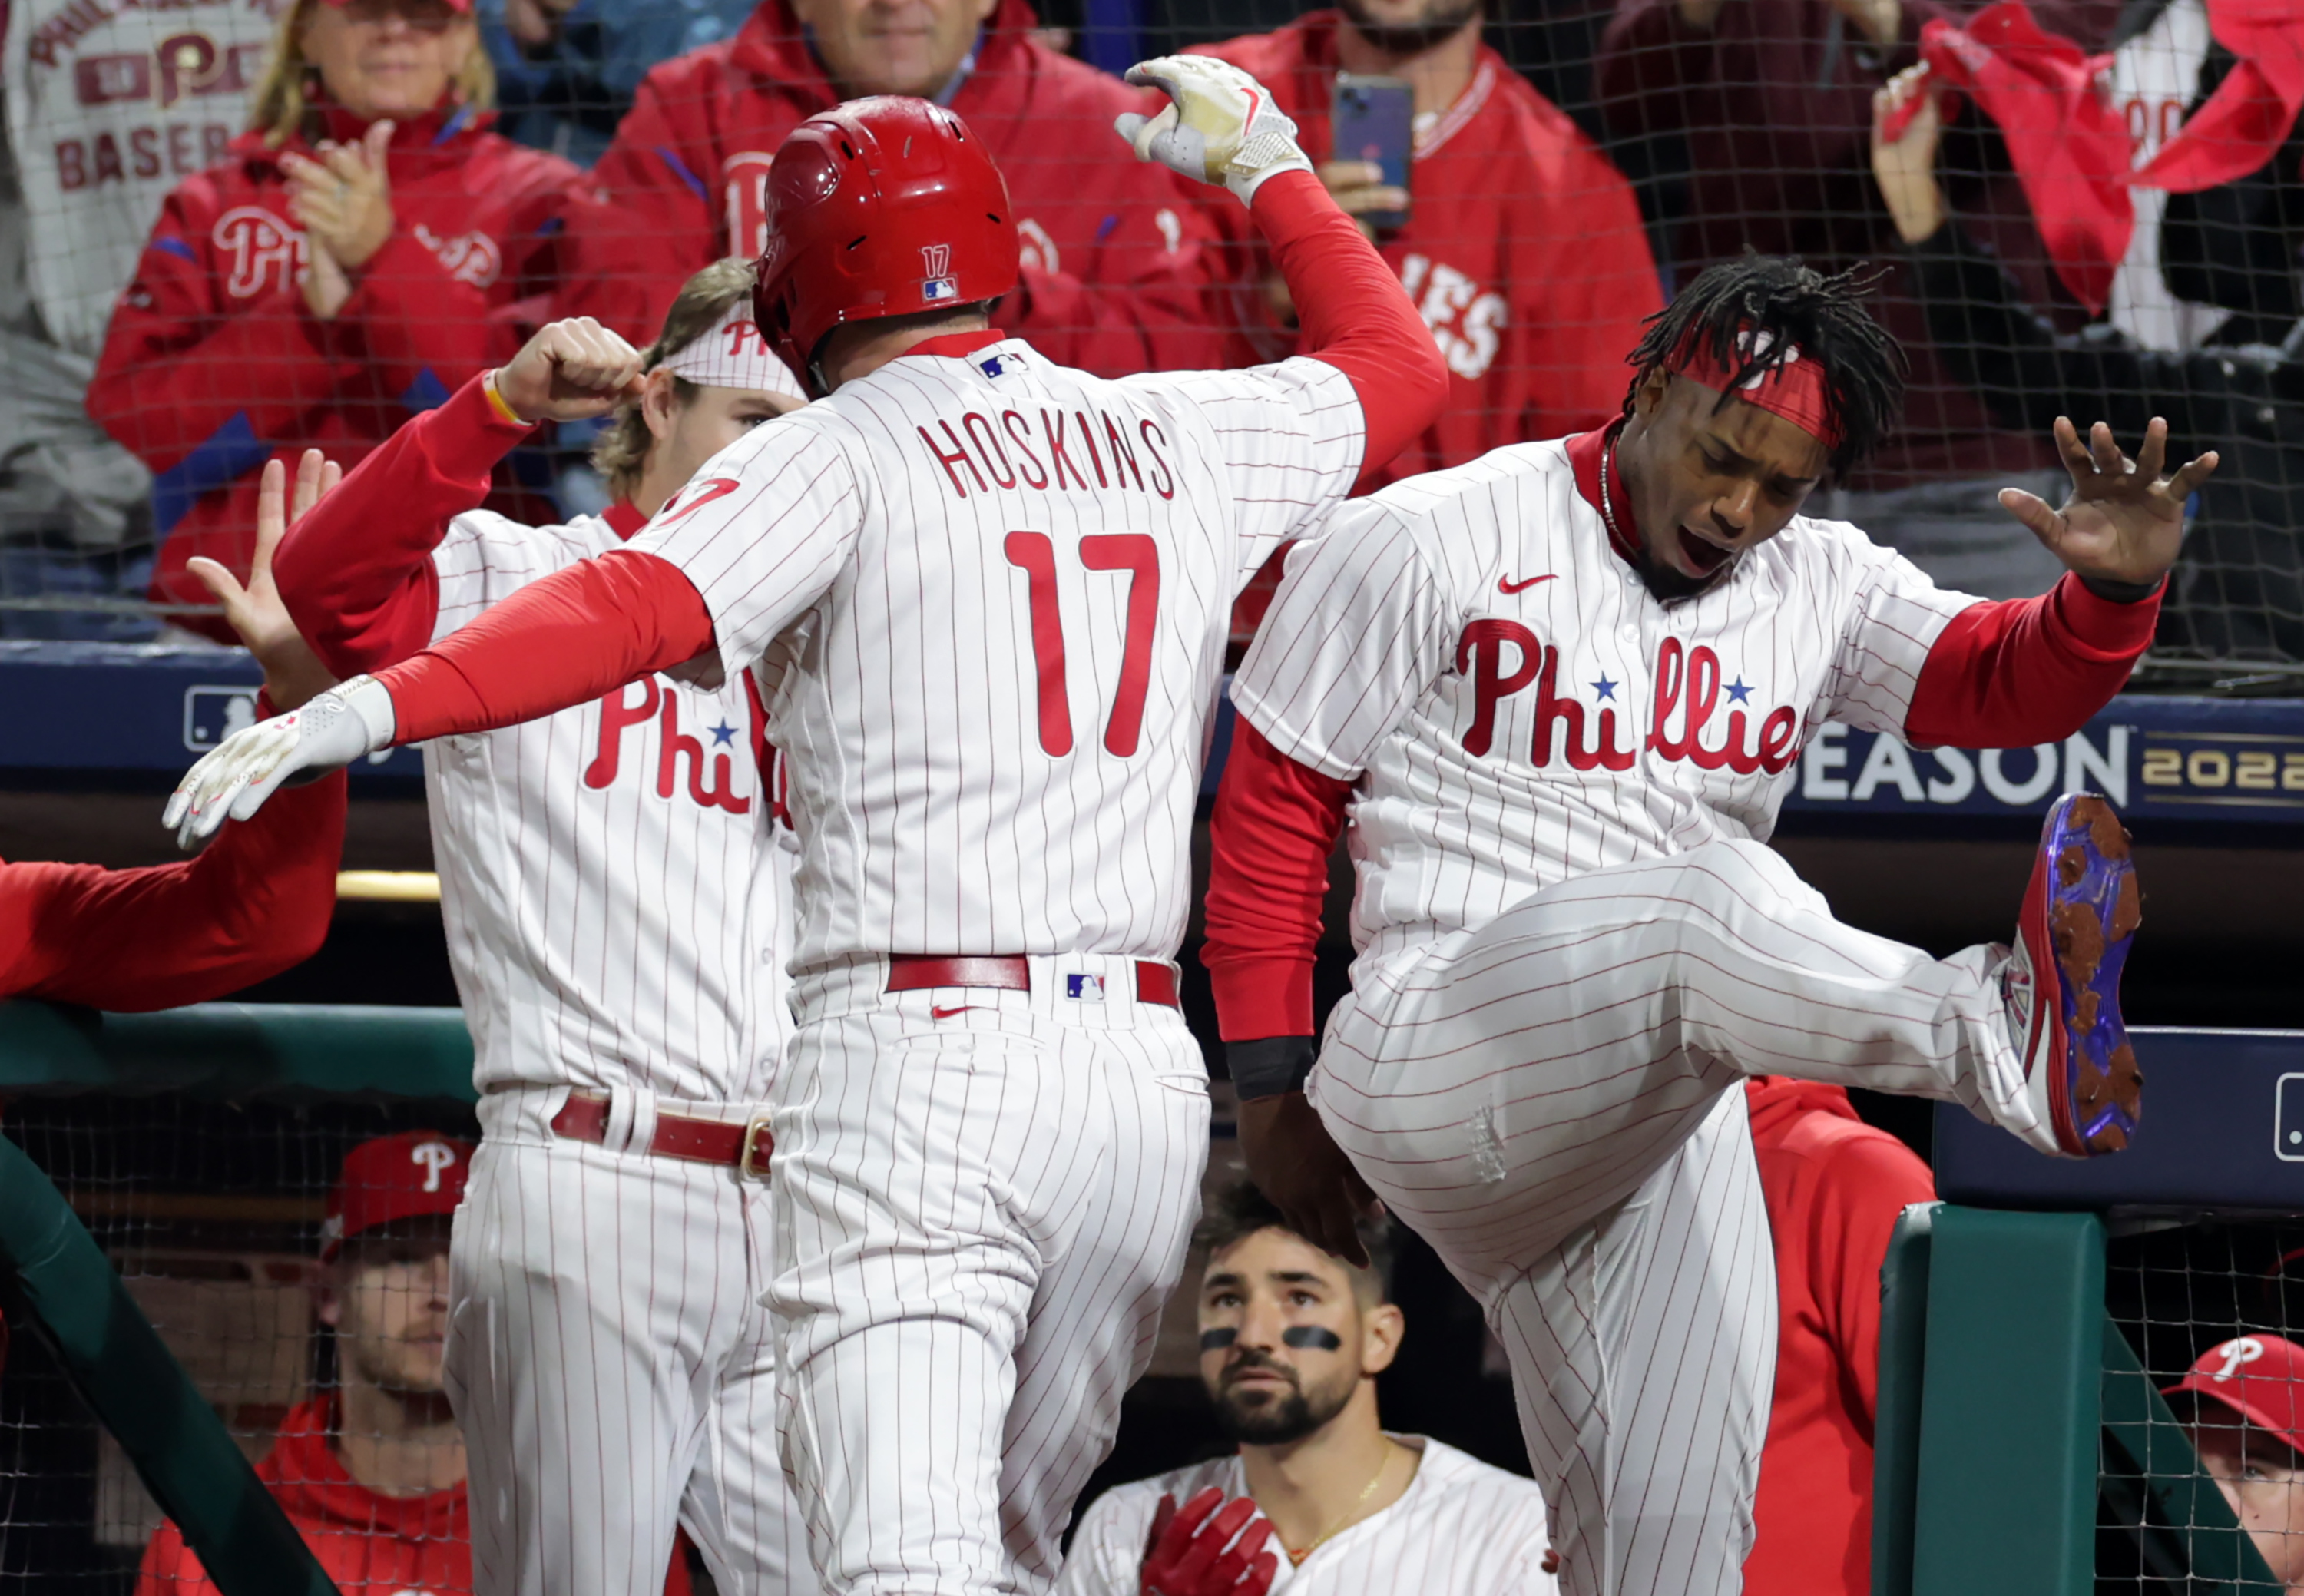 Brotherly Dub! The @Phillies are in the #NLCS once again